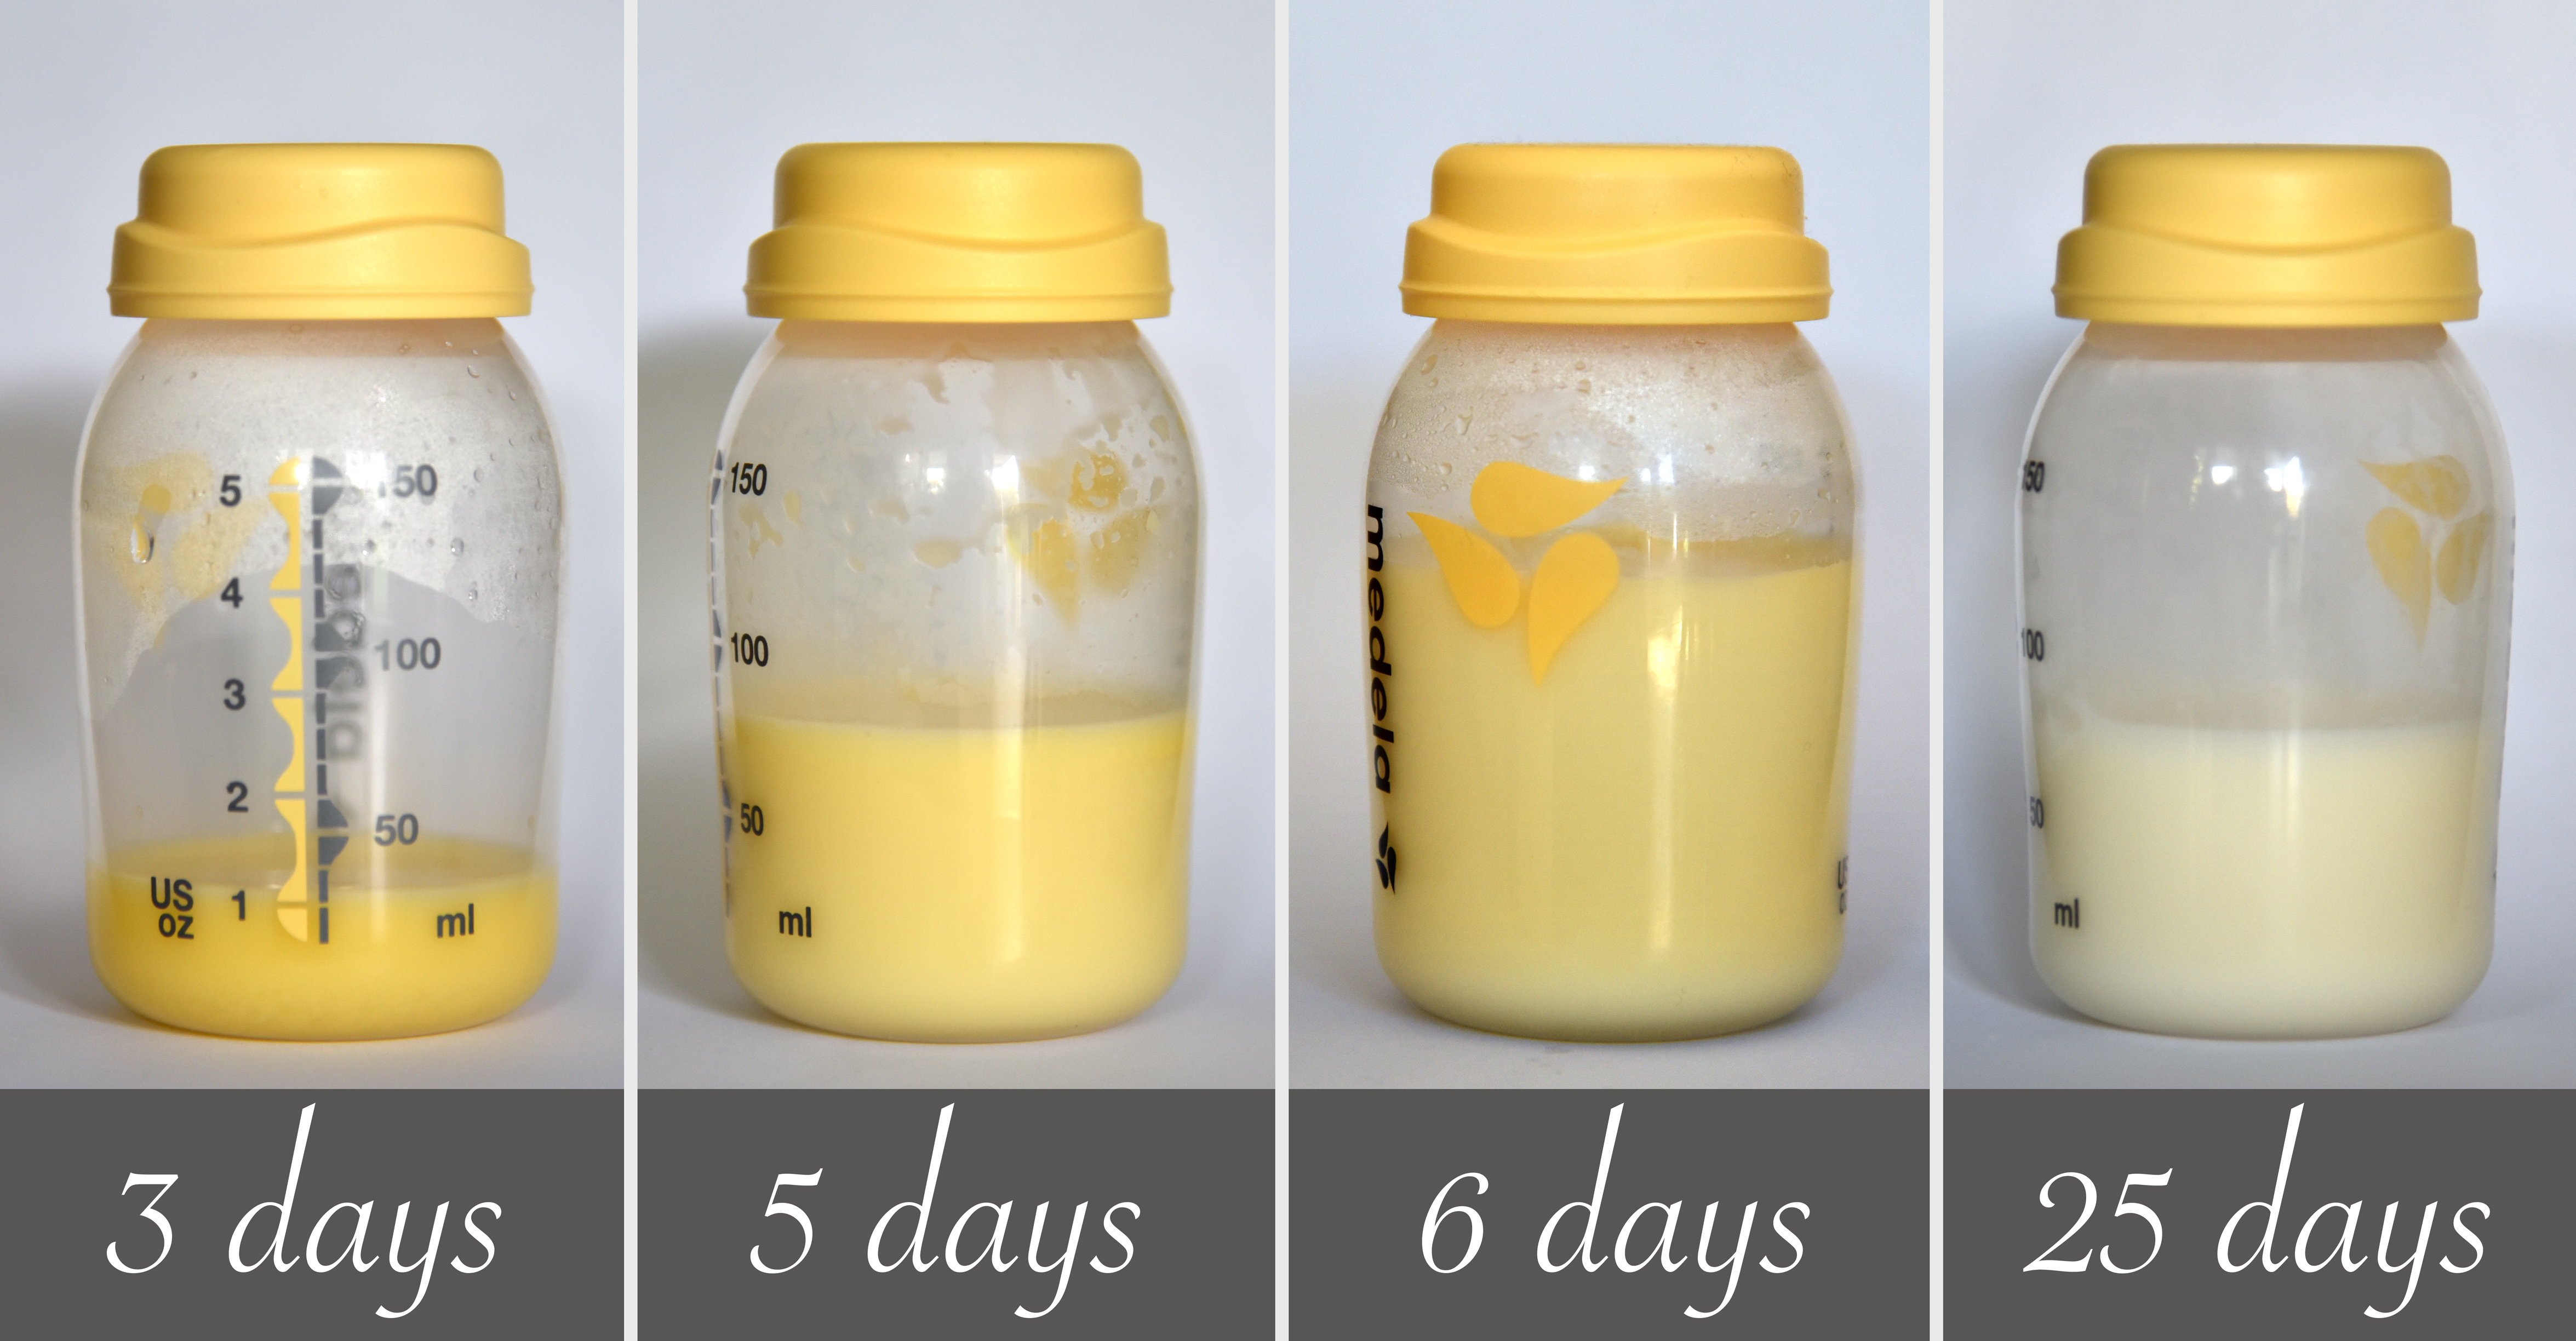 From Colostrum to Breastmilk. # Days after birth.